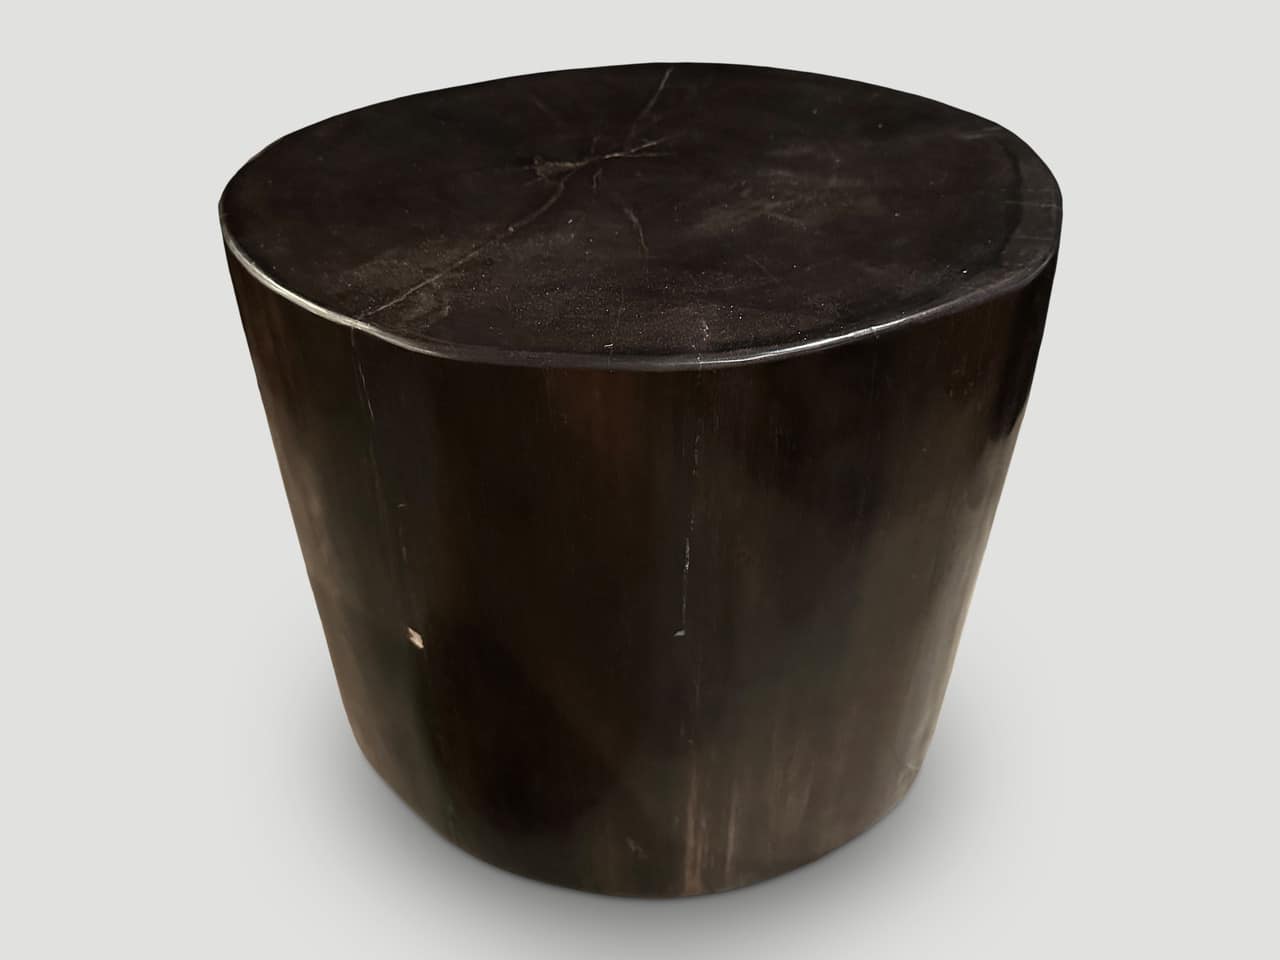 SUPER SMOOTH HIGH QUALITY PETRIFIED WOOD SIDE TABLE.